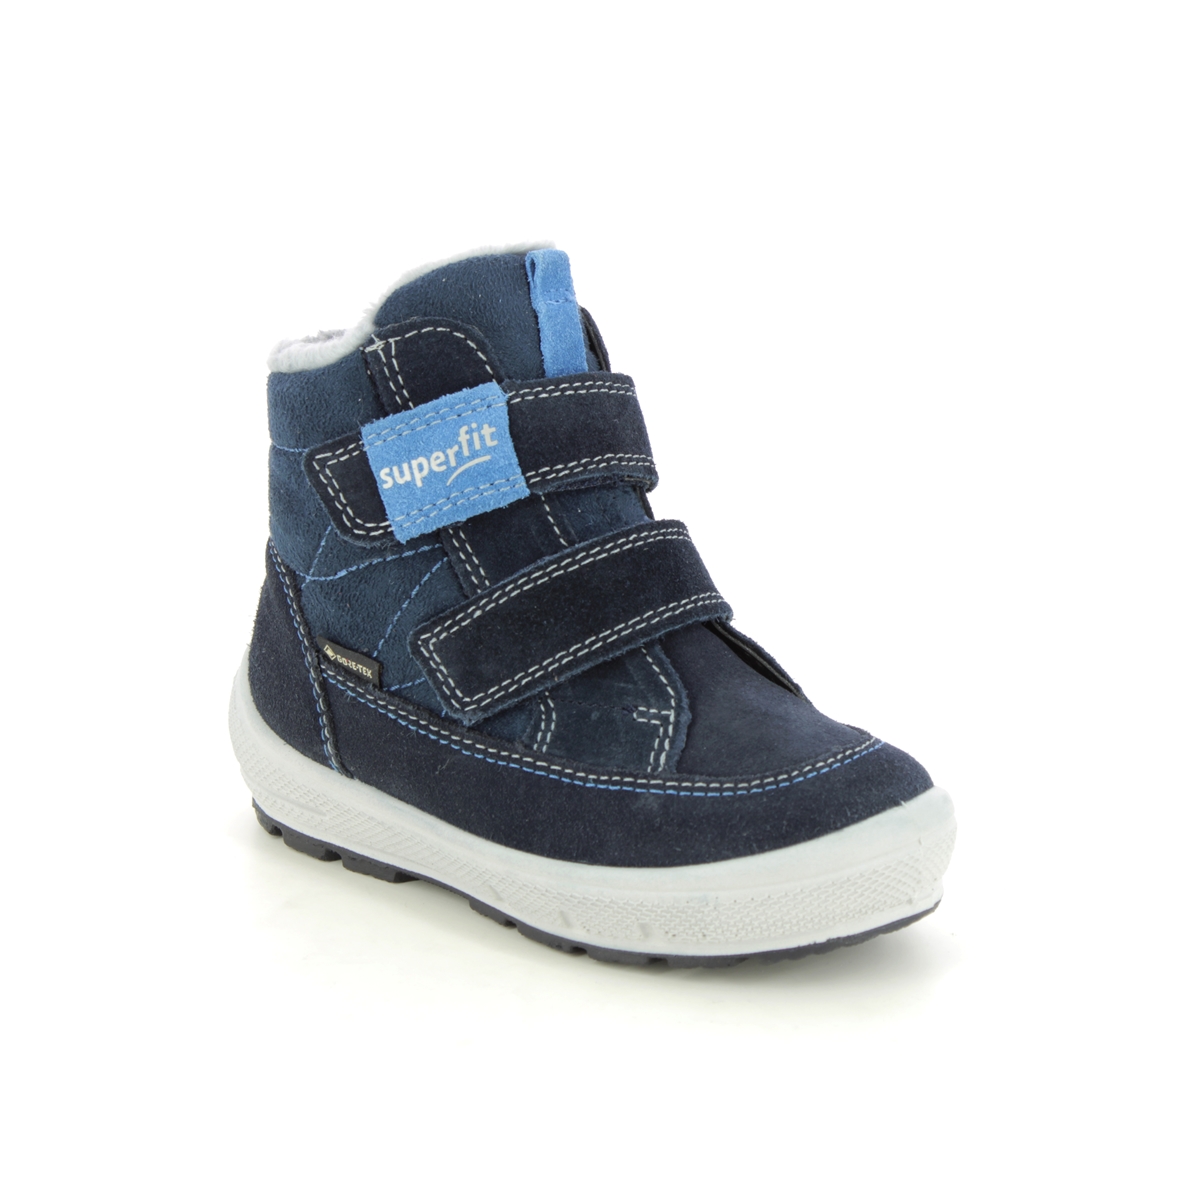 Superfit Groovy Gtx Navy Kids Toddler Boys Boots 1009314-8000 In Size 25 In Plain Navy